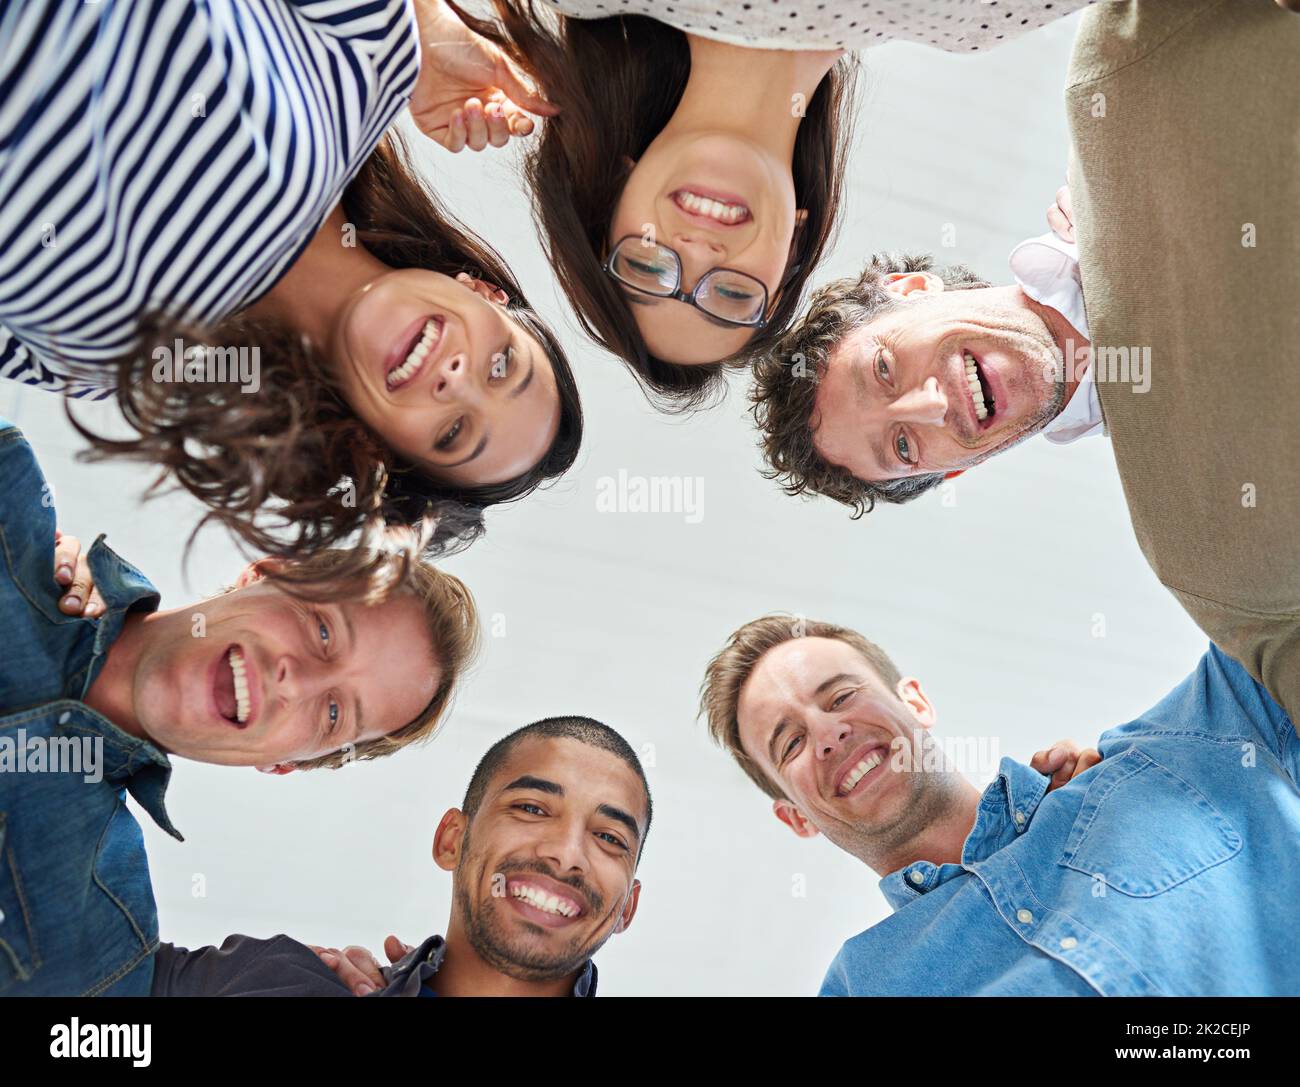 Part of a motivated team. Low angle shot of a team of people smiling down at the camera positively. Stock Photo